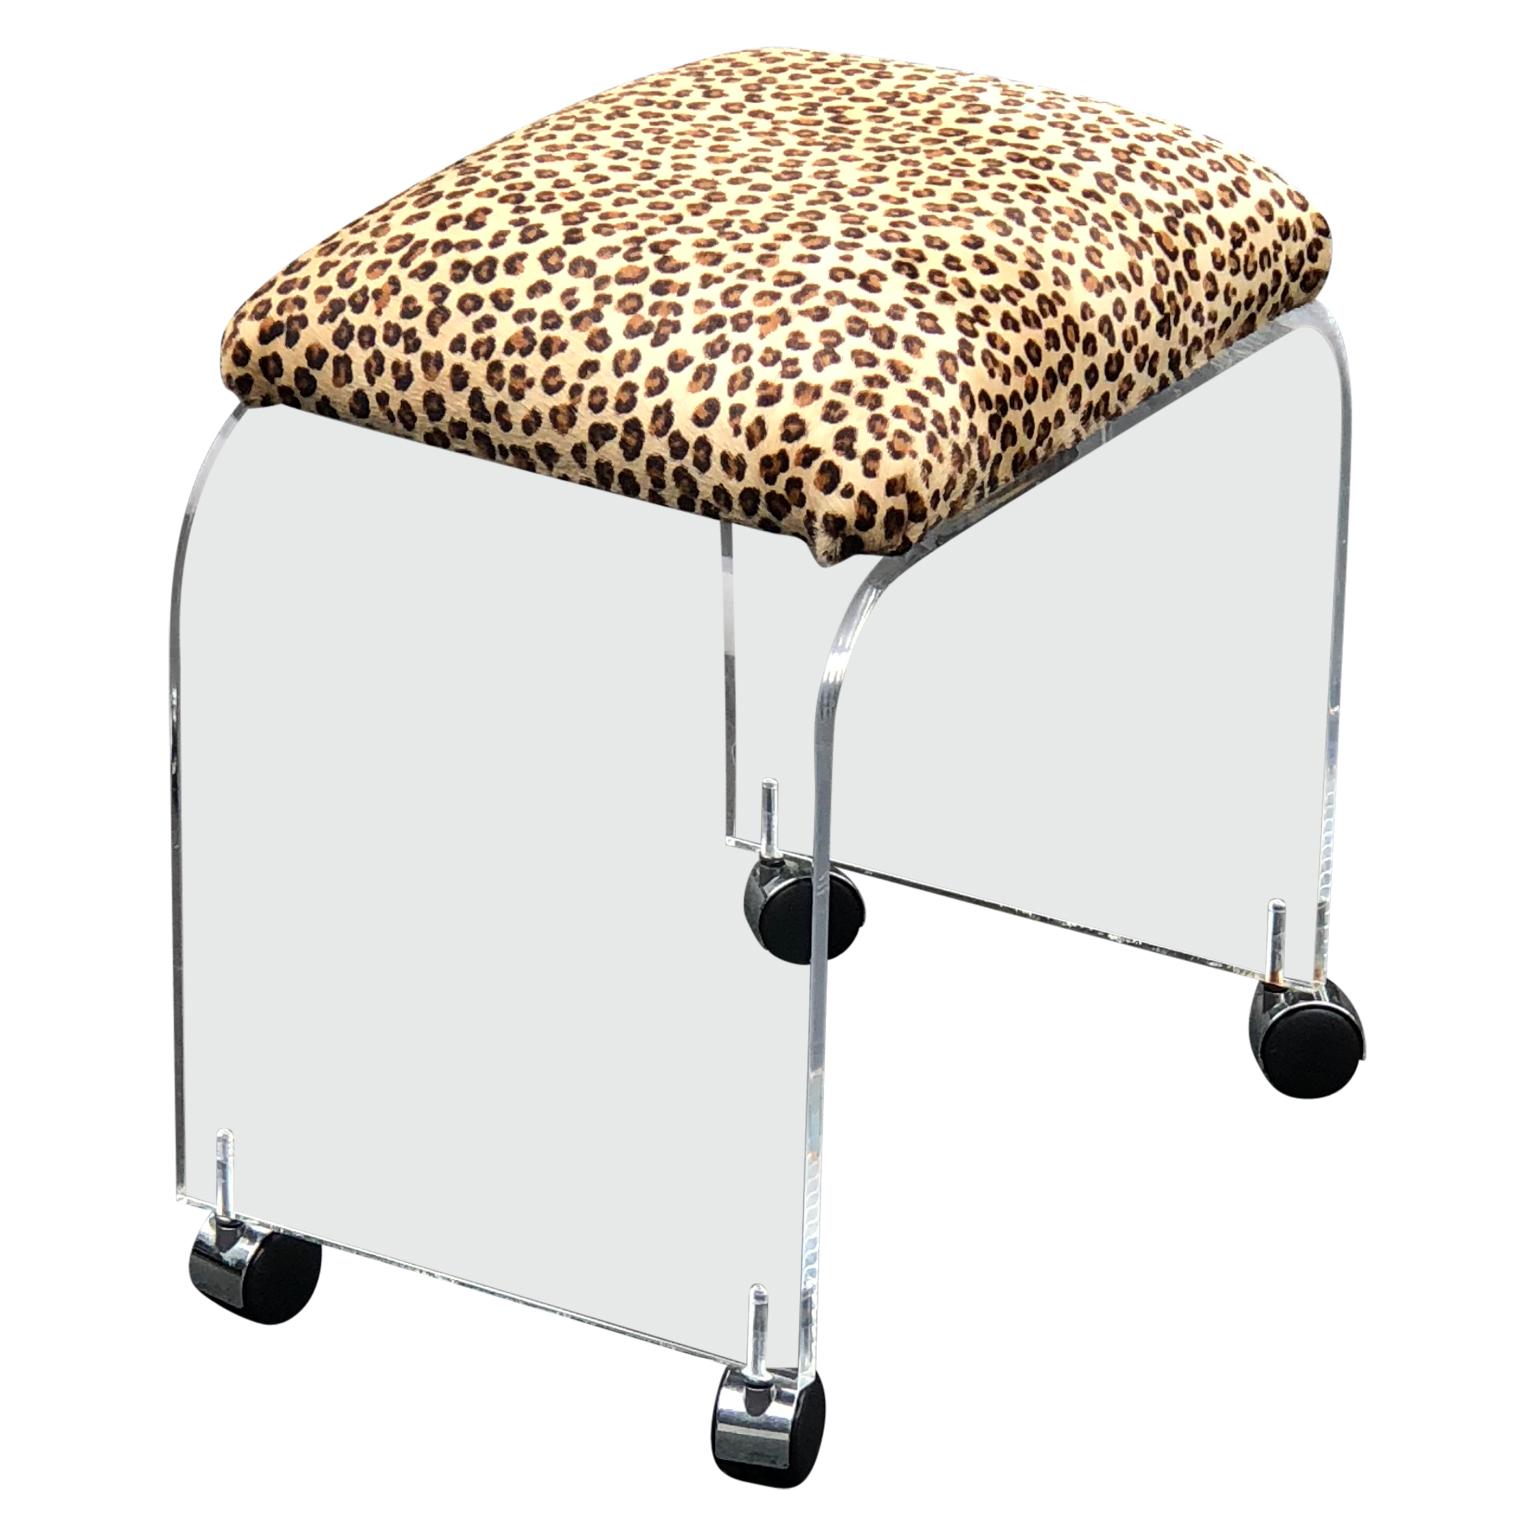 Animal Skin Mid-Century Modern Waterfall Lucite Stool or Bench with Faux Cheetah Fabric For Sale